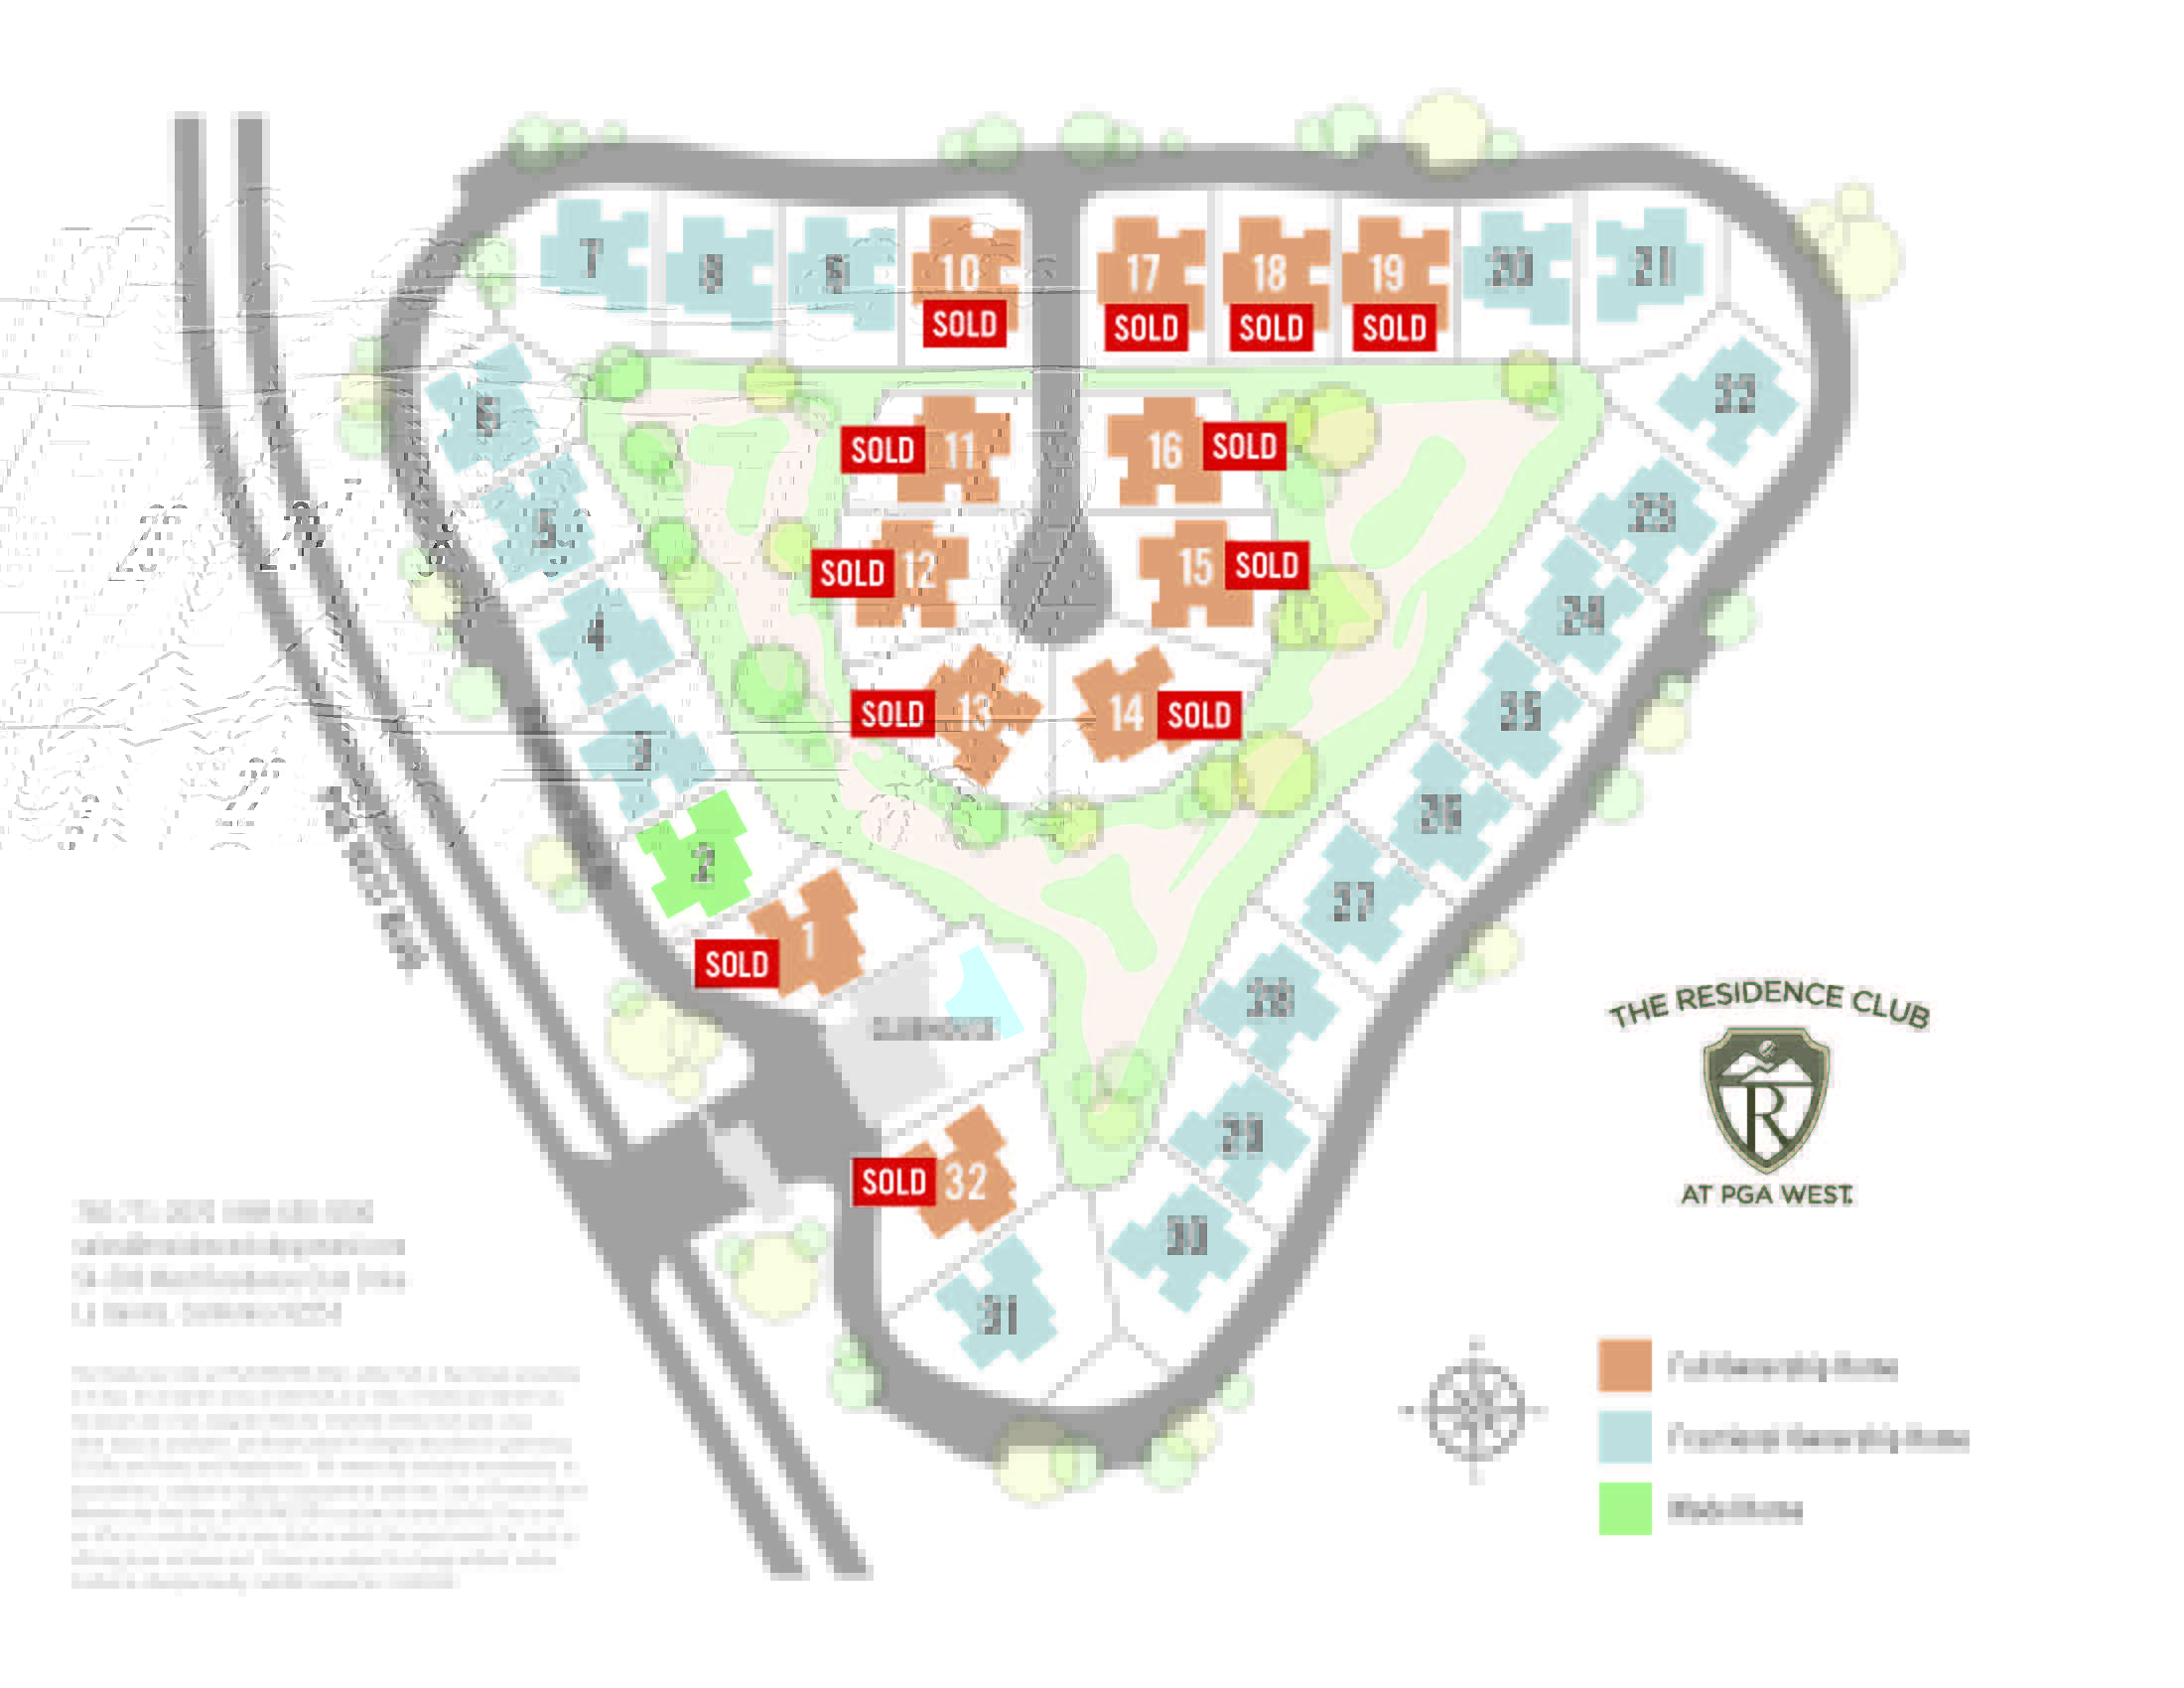 The Residence Club Site Plan